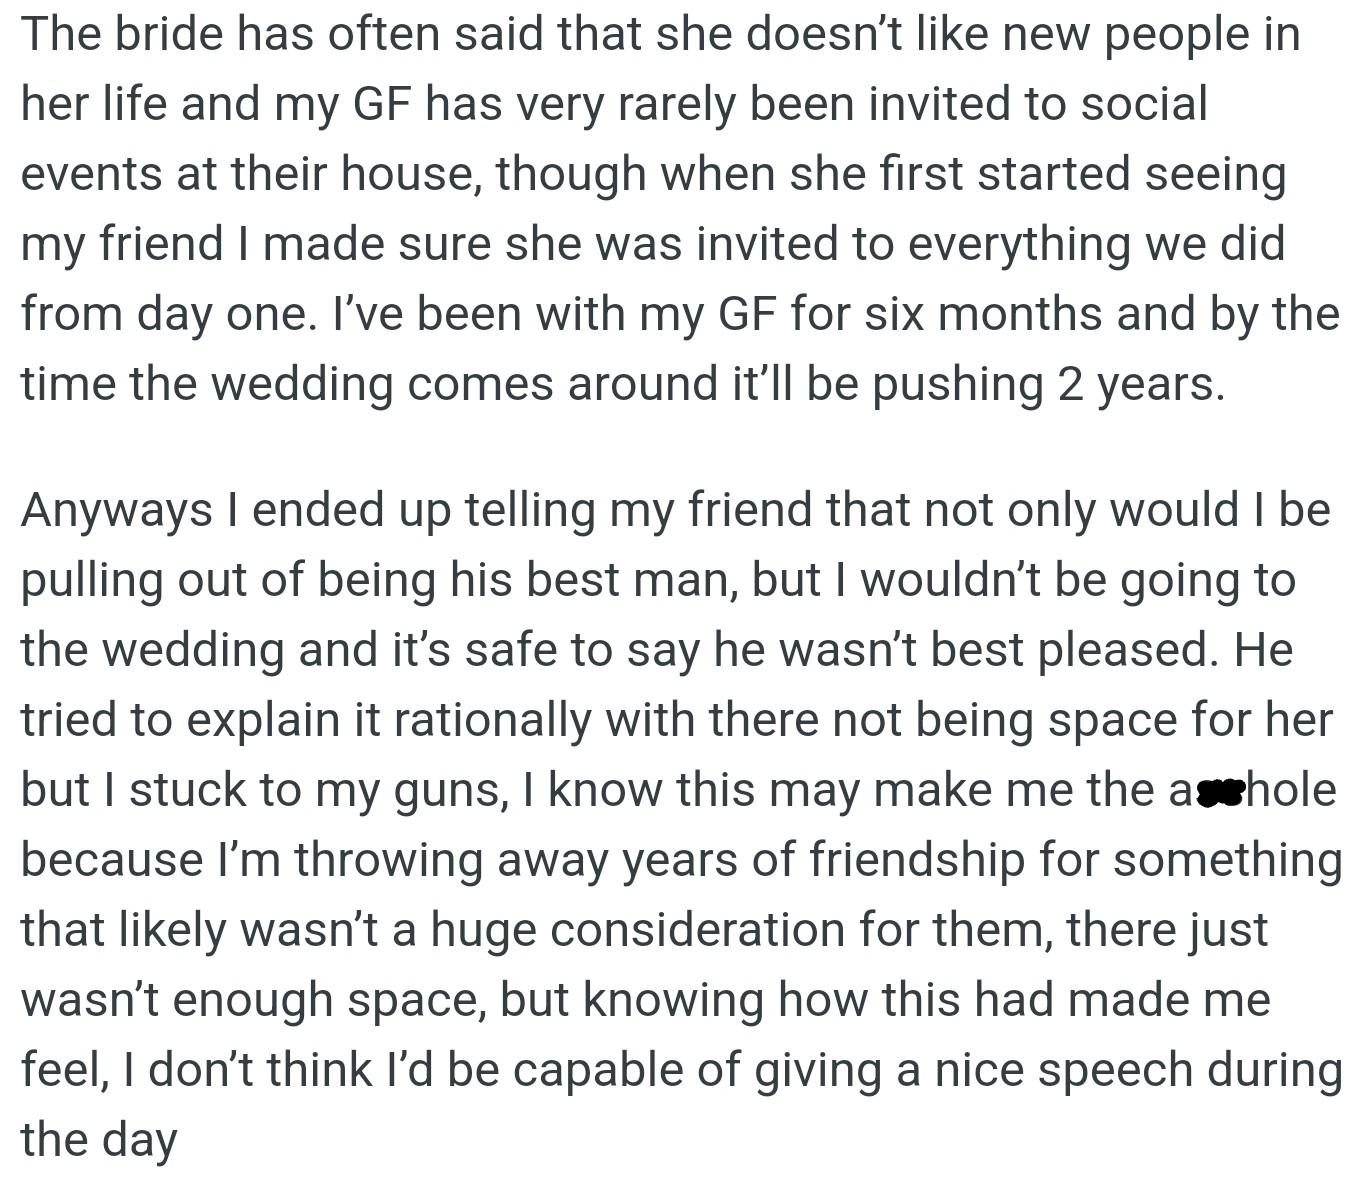 OP stepped down as best man and declined the wedding invitation after his girlfriend was not included on the guest list.